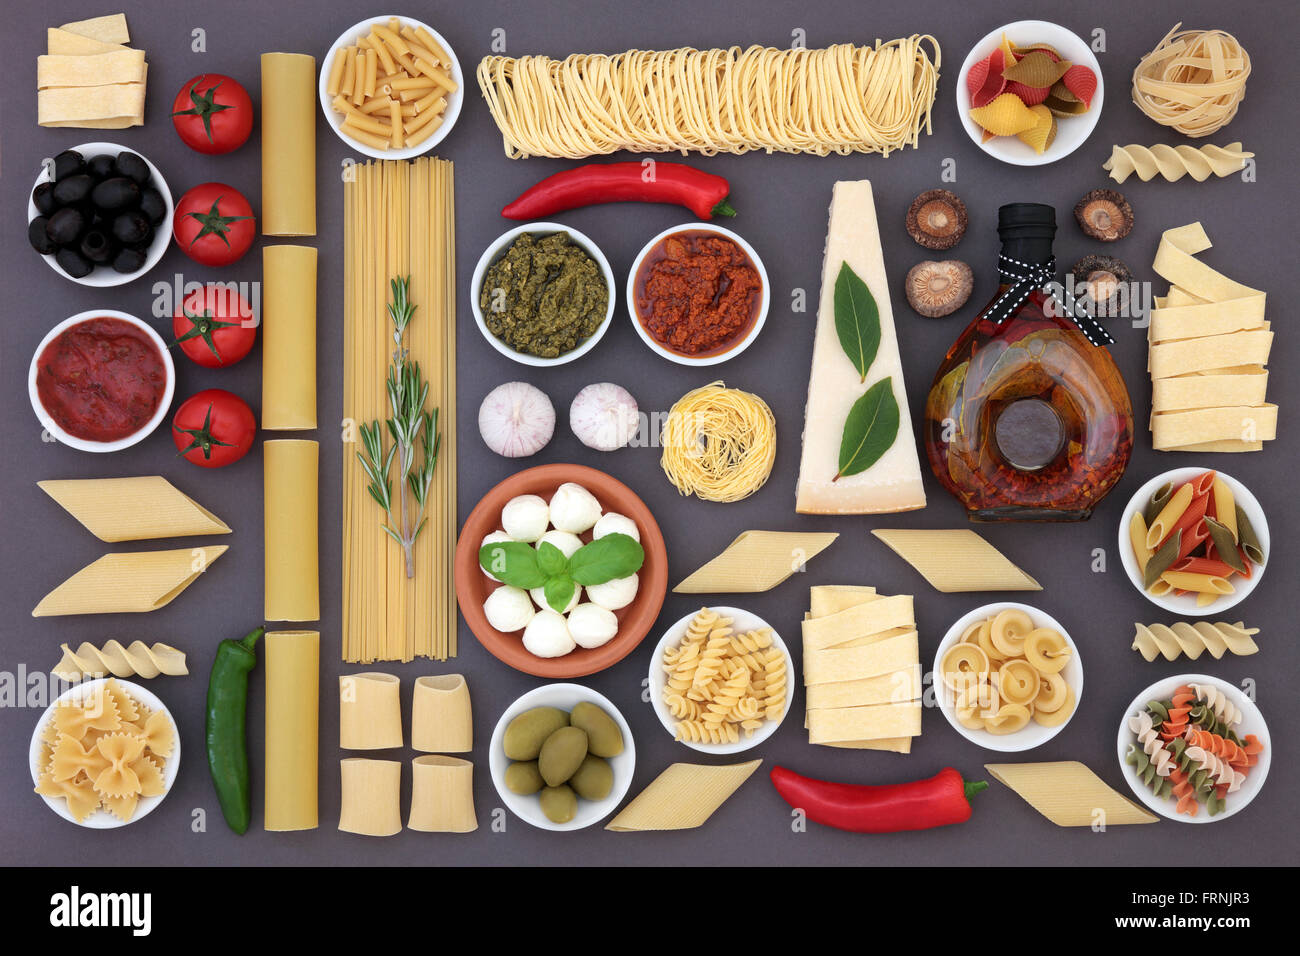 Healthy Mediterranean diet and food ingredients forming an abstract background over grey. Stock Photo